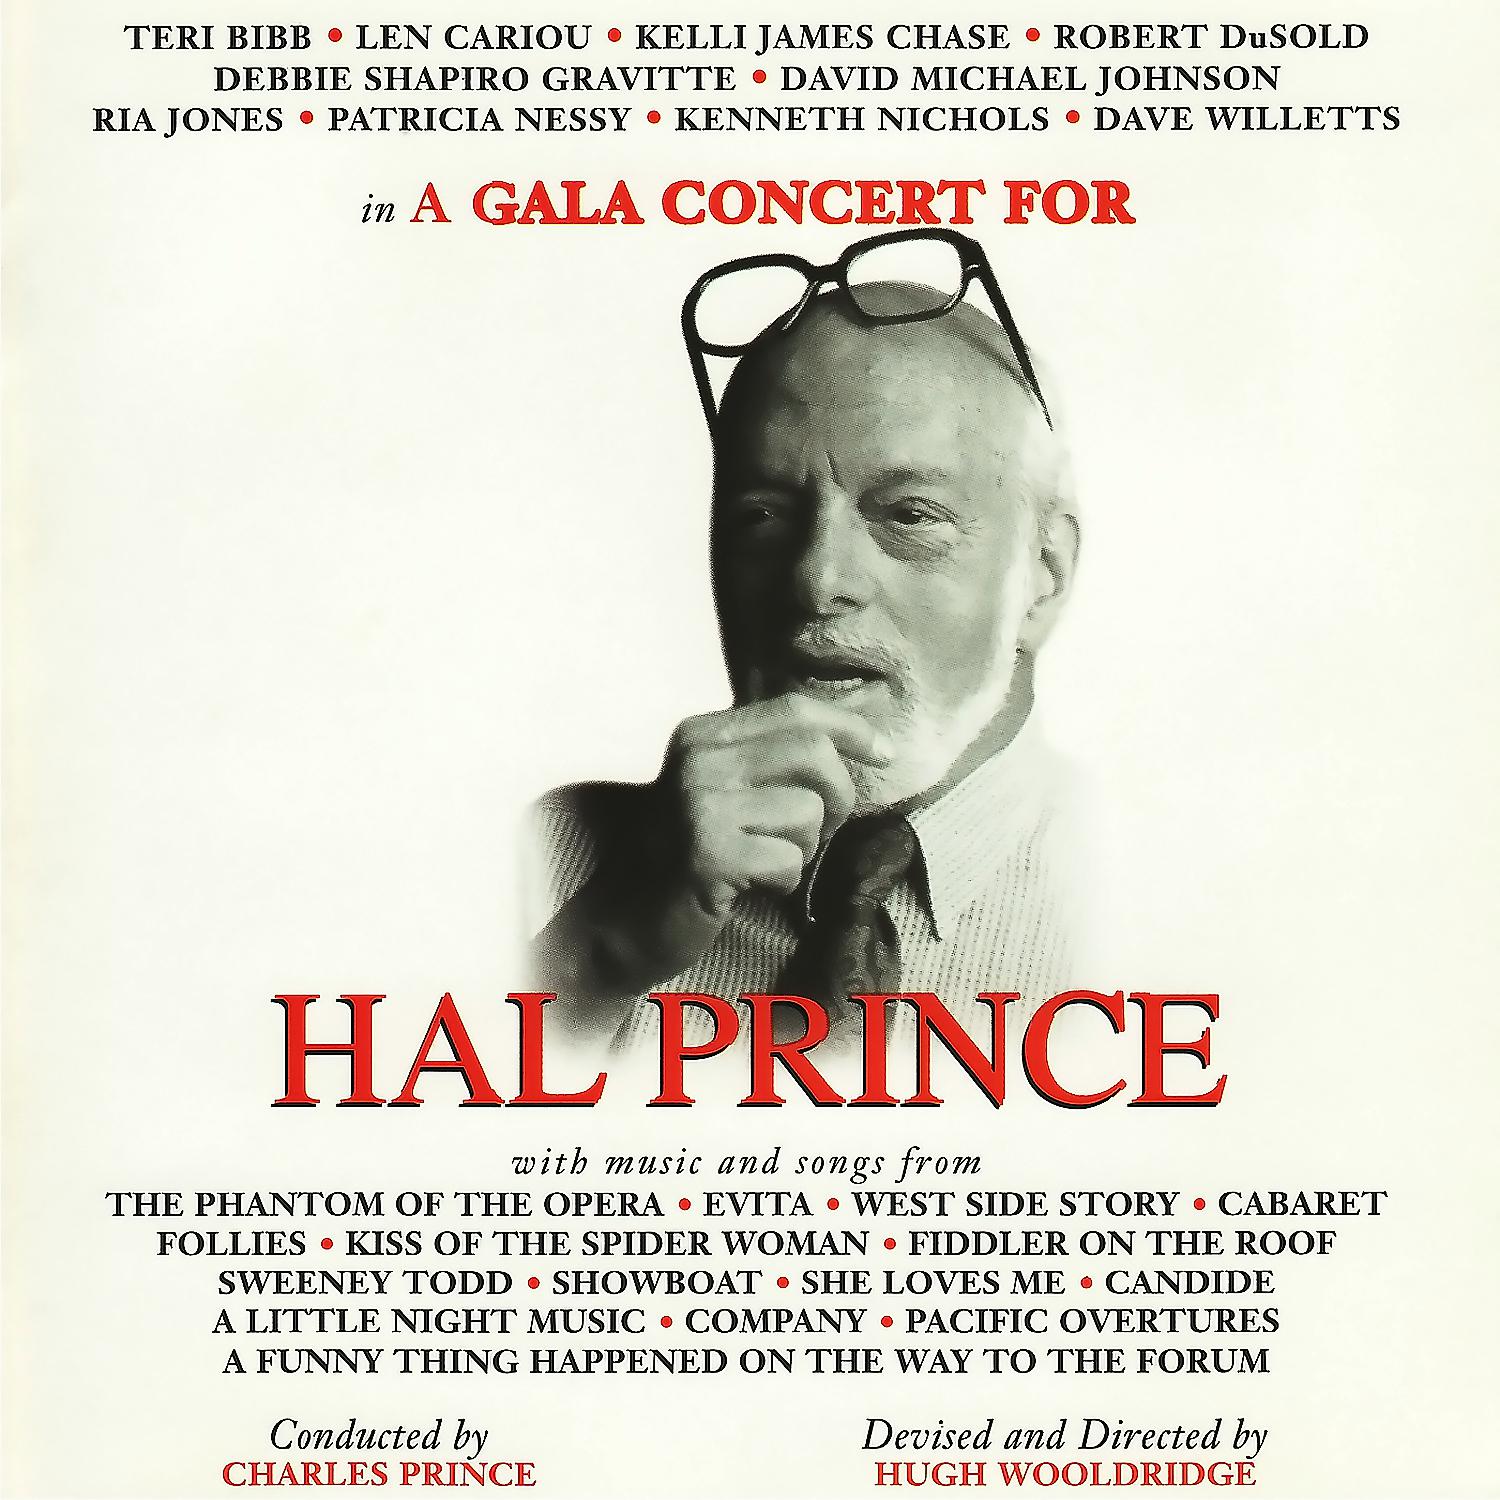 Overture for Hal Prince